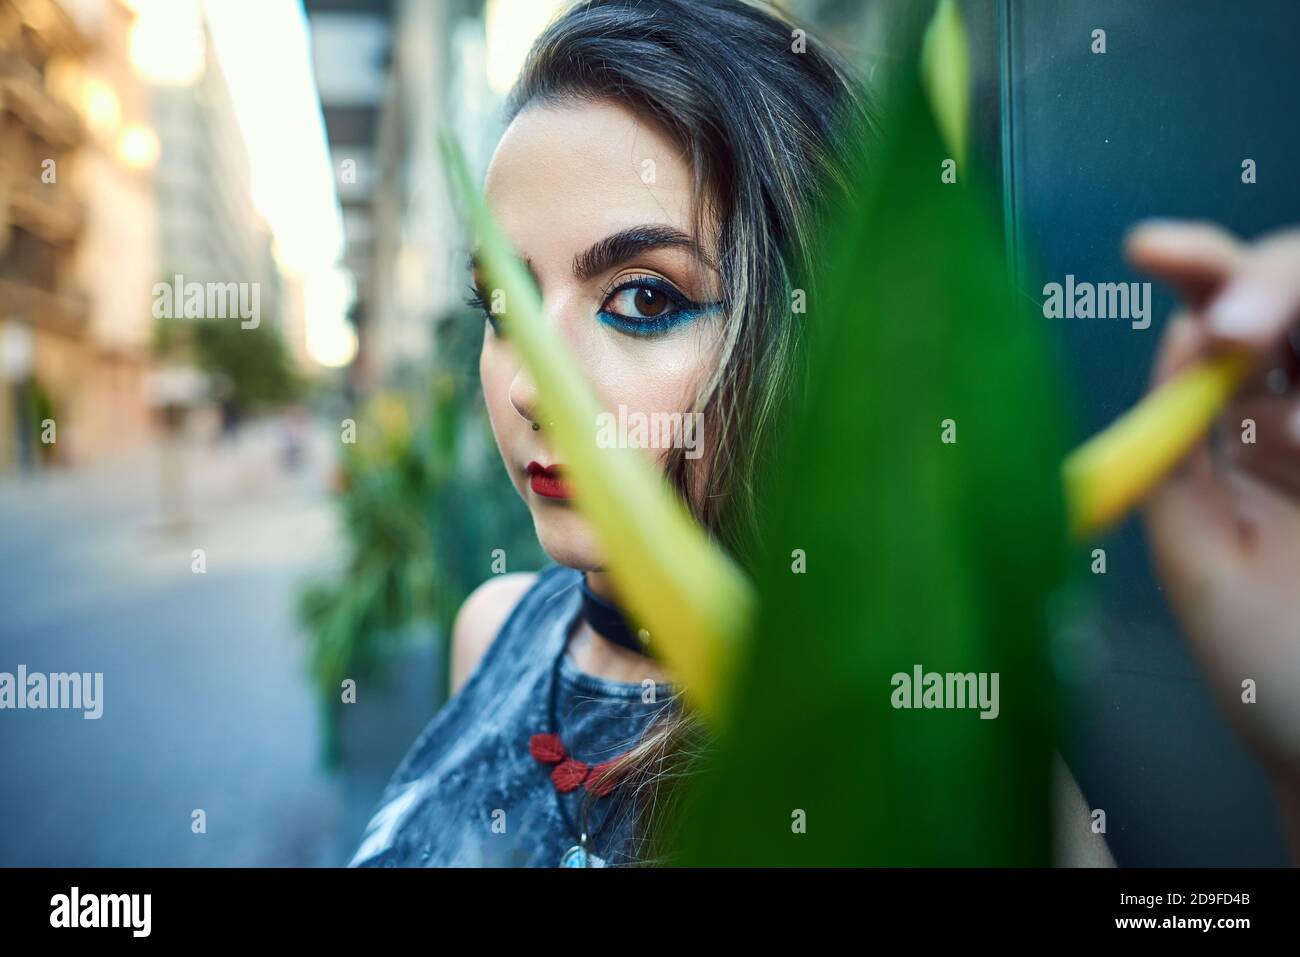 Young woman with urban style posing on the street. Stock Photo